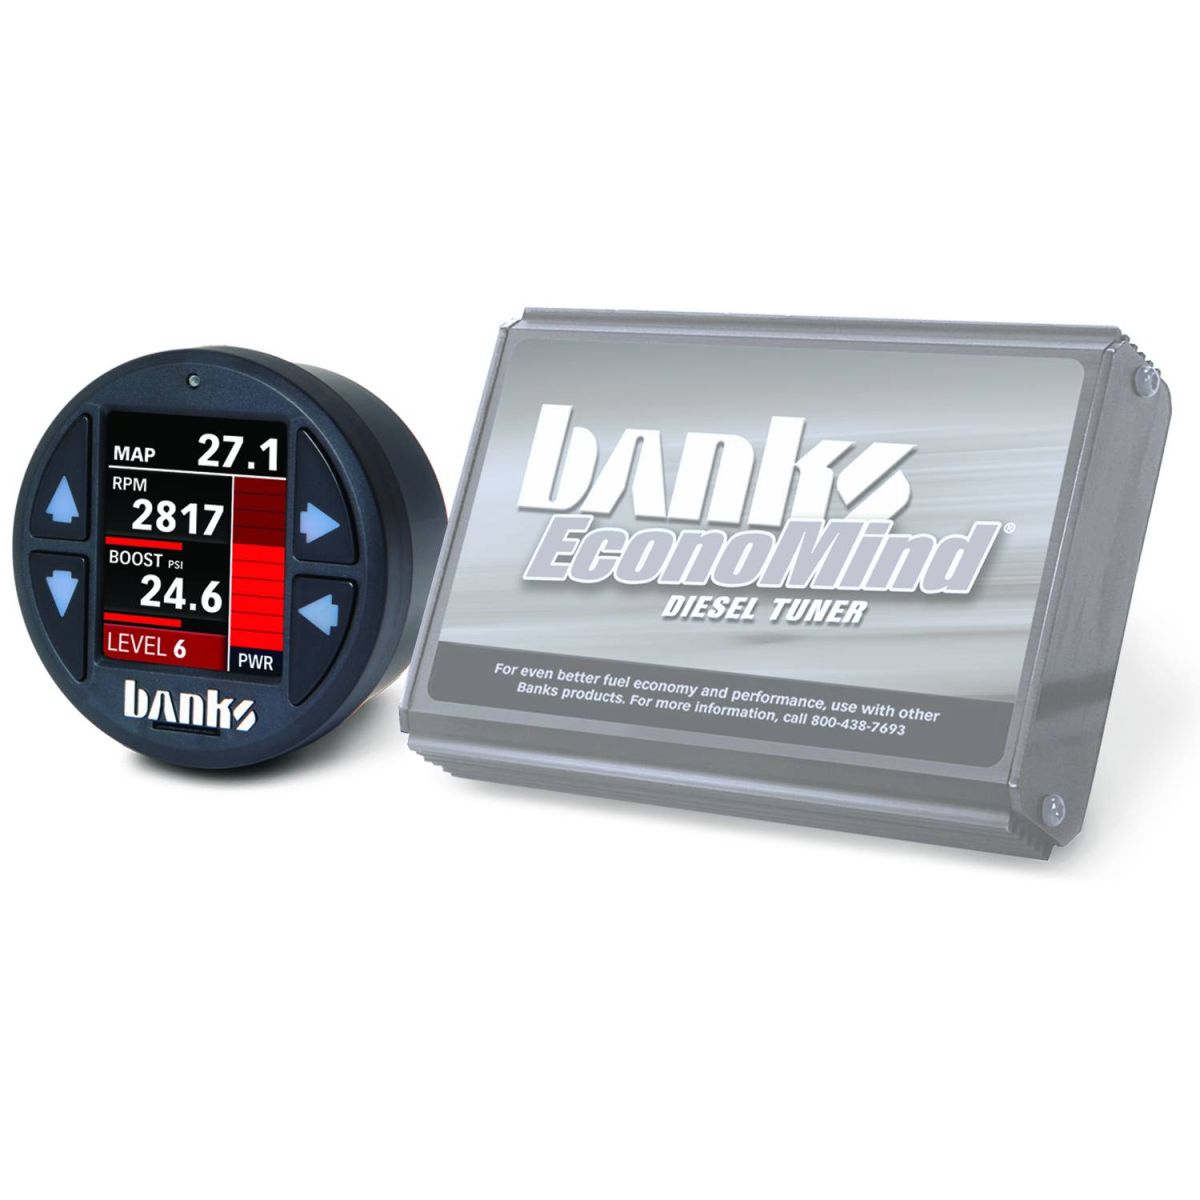 Banks Power - Banks Power Economind Diesel Tuner (PowerPack calibration) with Banks iDash 1.8 Super Gauge for use with 2006-2007 Dodge 5.9L